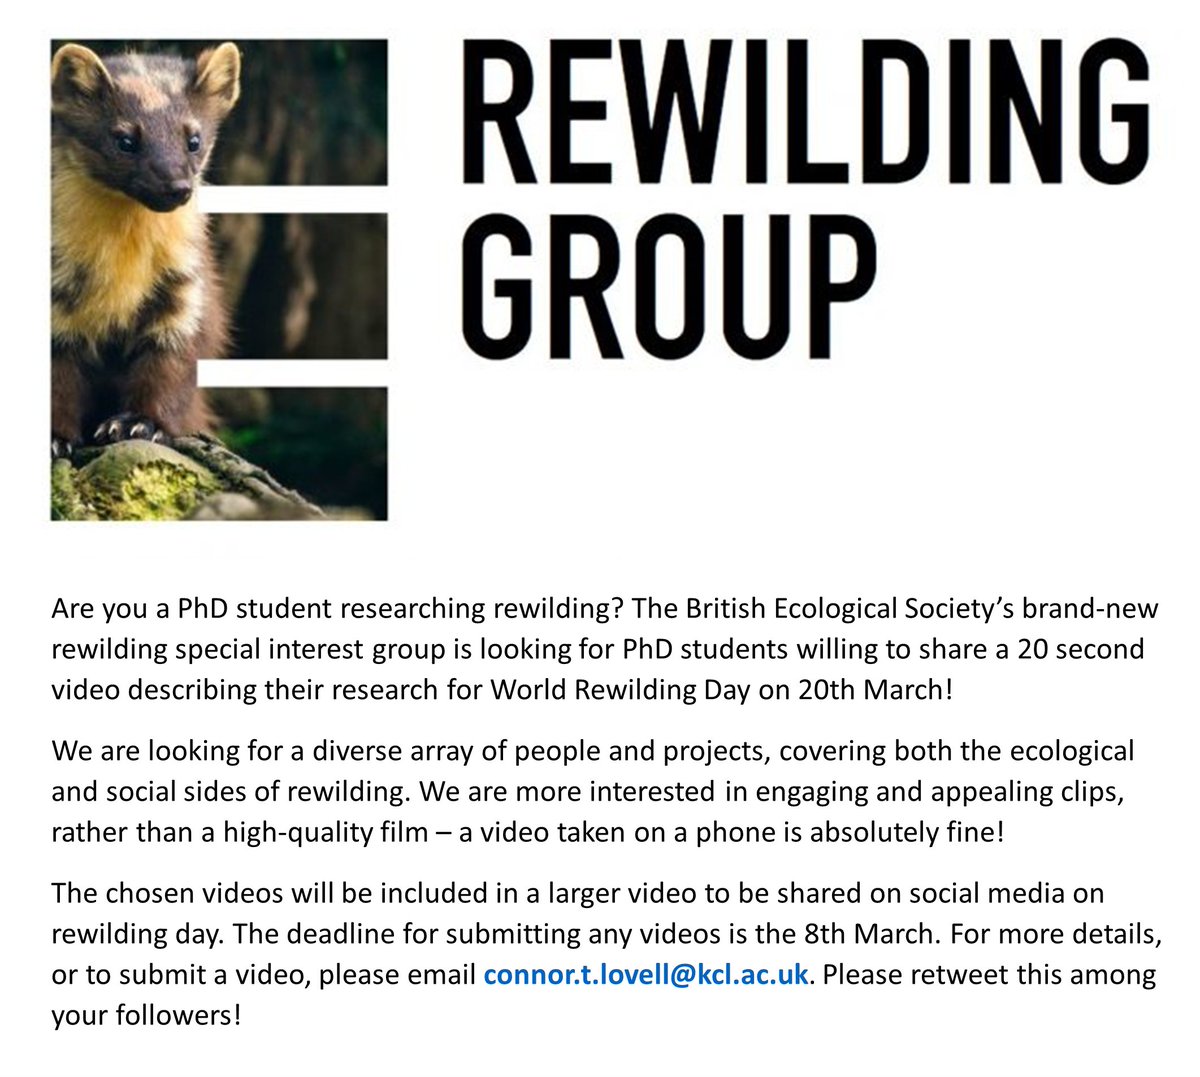 The @BritishEcolSoc’s new Rewilding Group is looking for #rewilding PhD students to do a short video describing their research for World Rewilding Day! For more details or to submit a video (deadline 8th March), pls email connor.t.lovell@kcl.ac.uk. Pls retweet! #HopeIntoAction